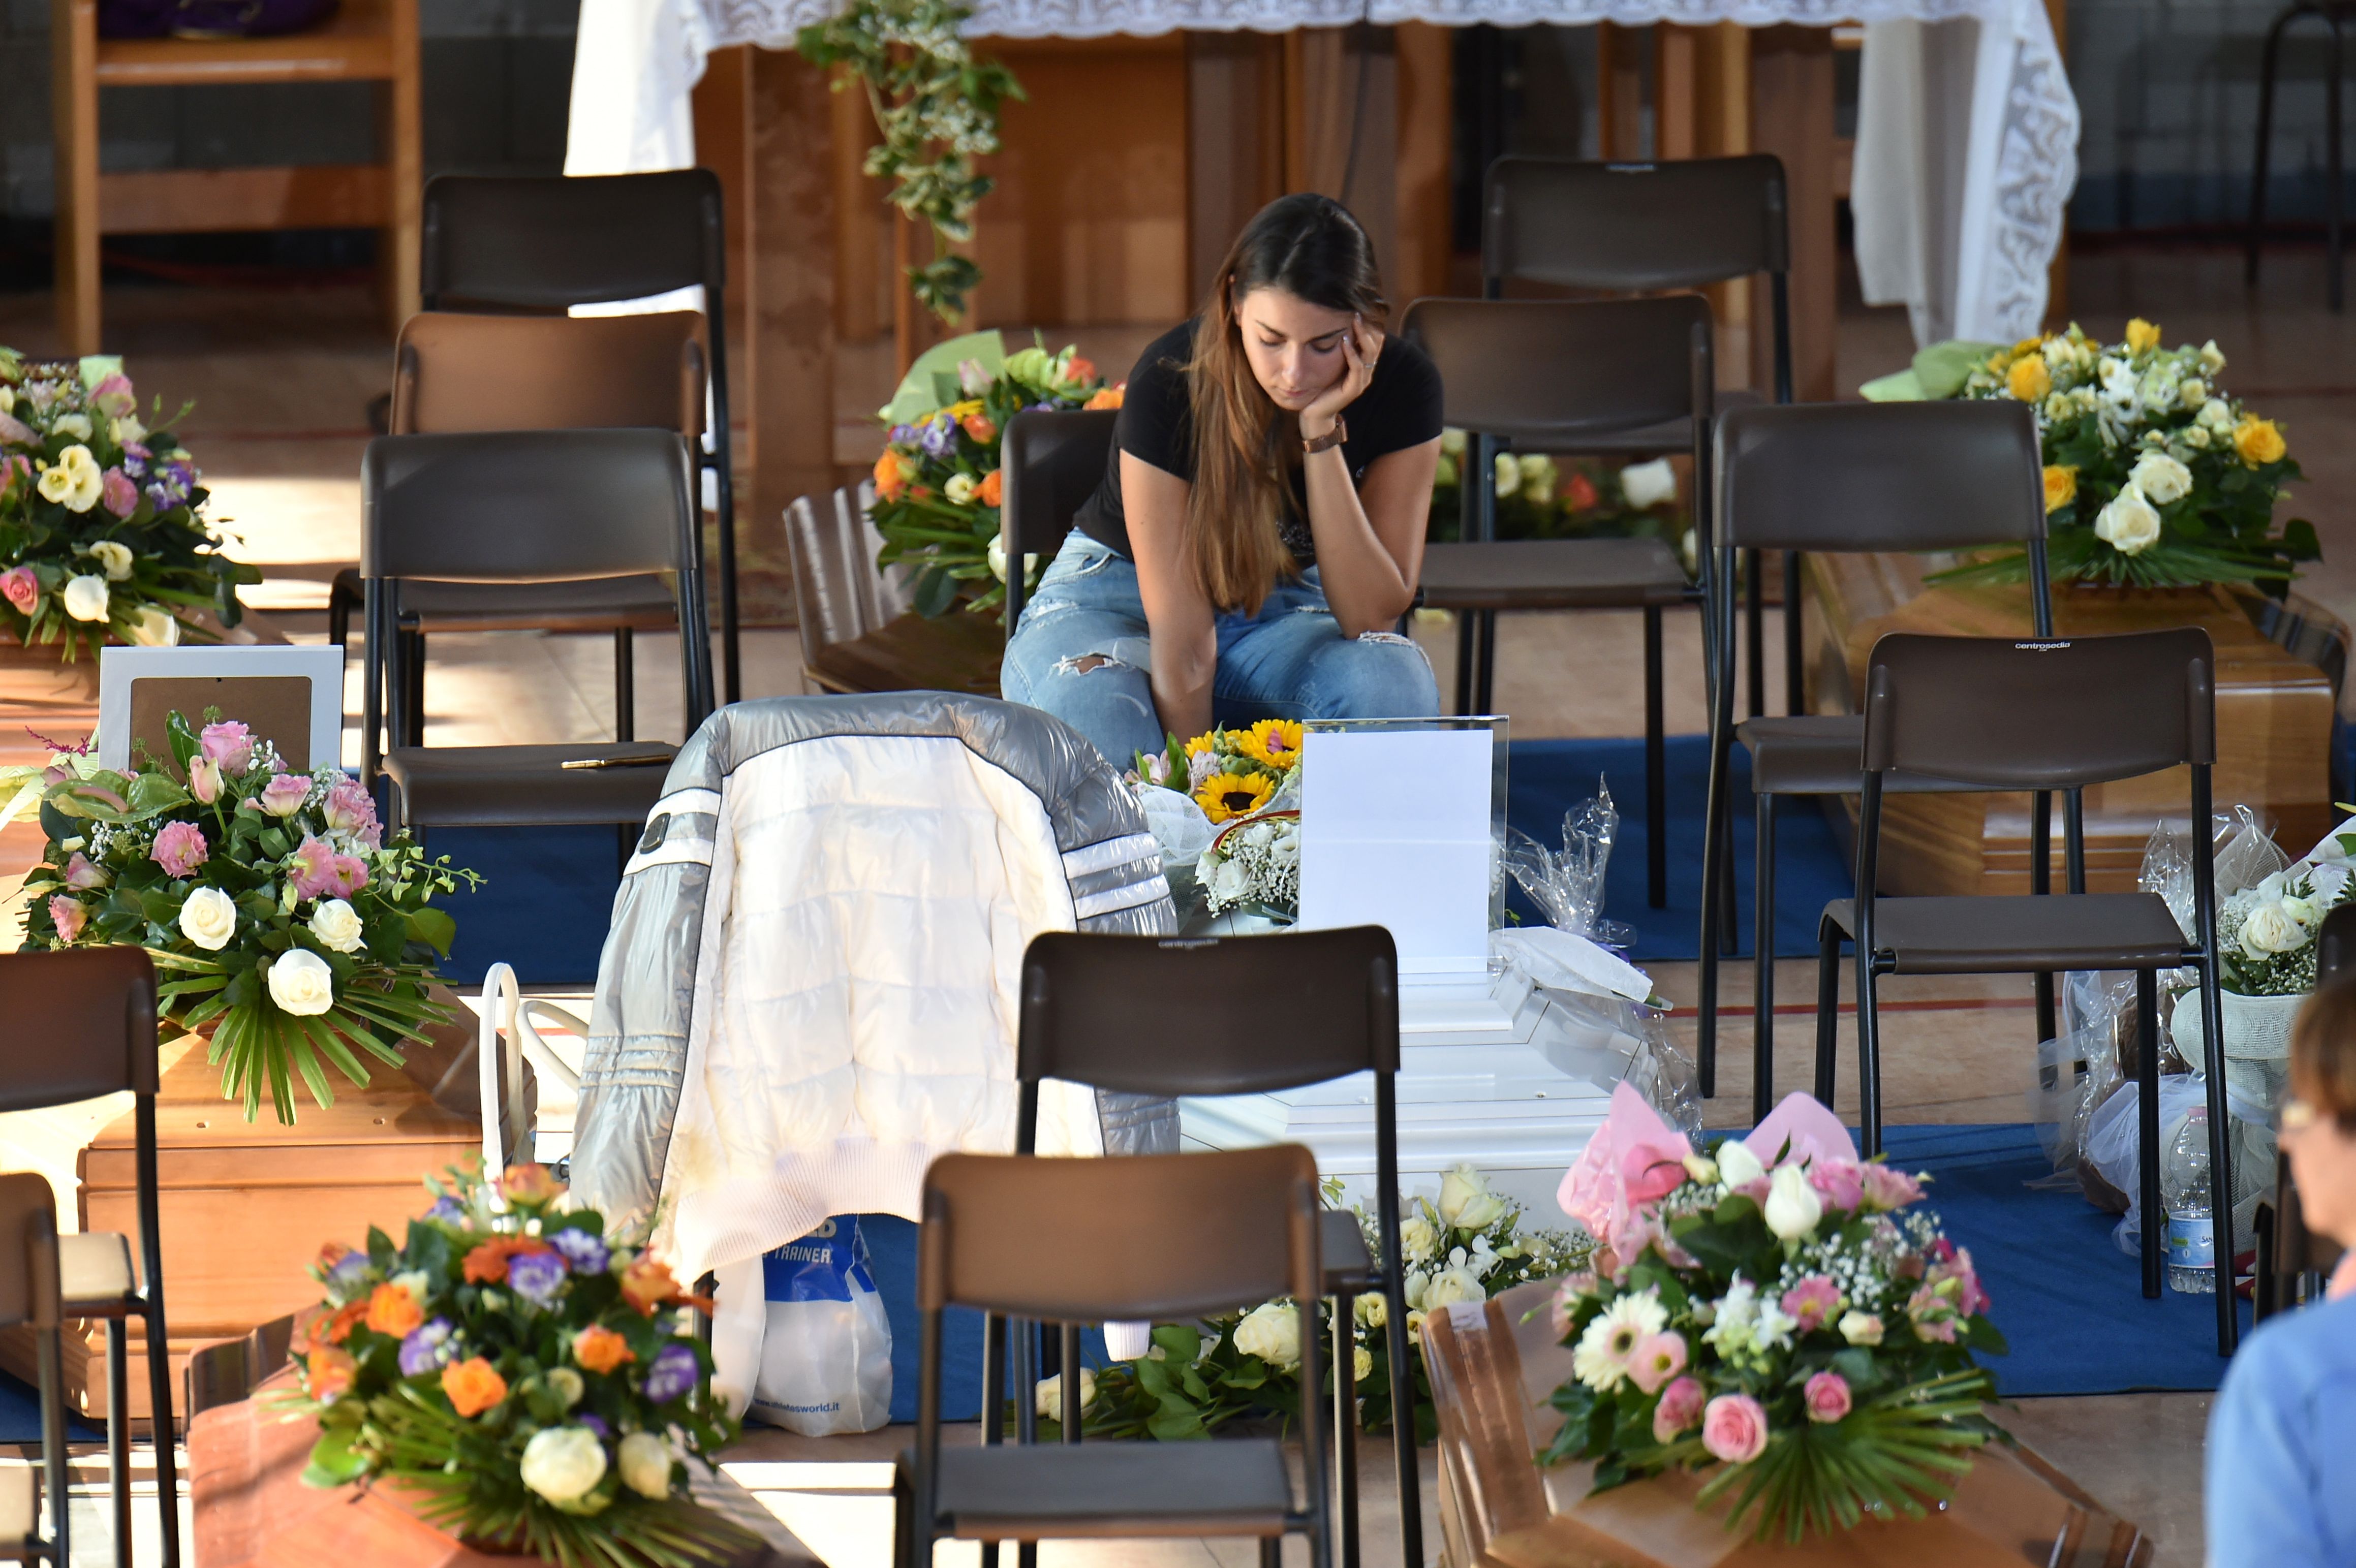 Italy quake death toll hits 284 on day of mass funeral